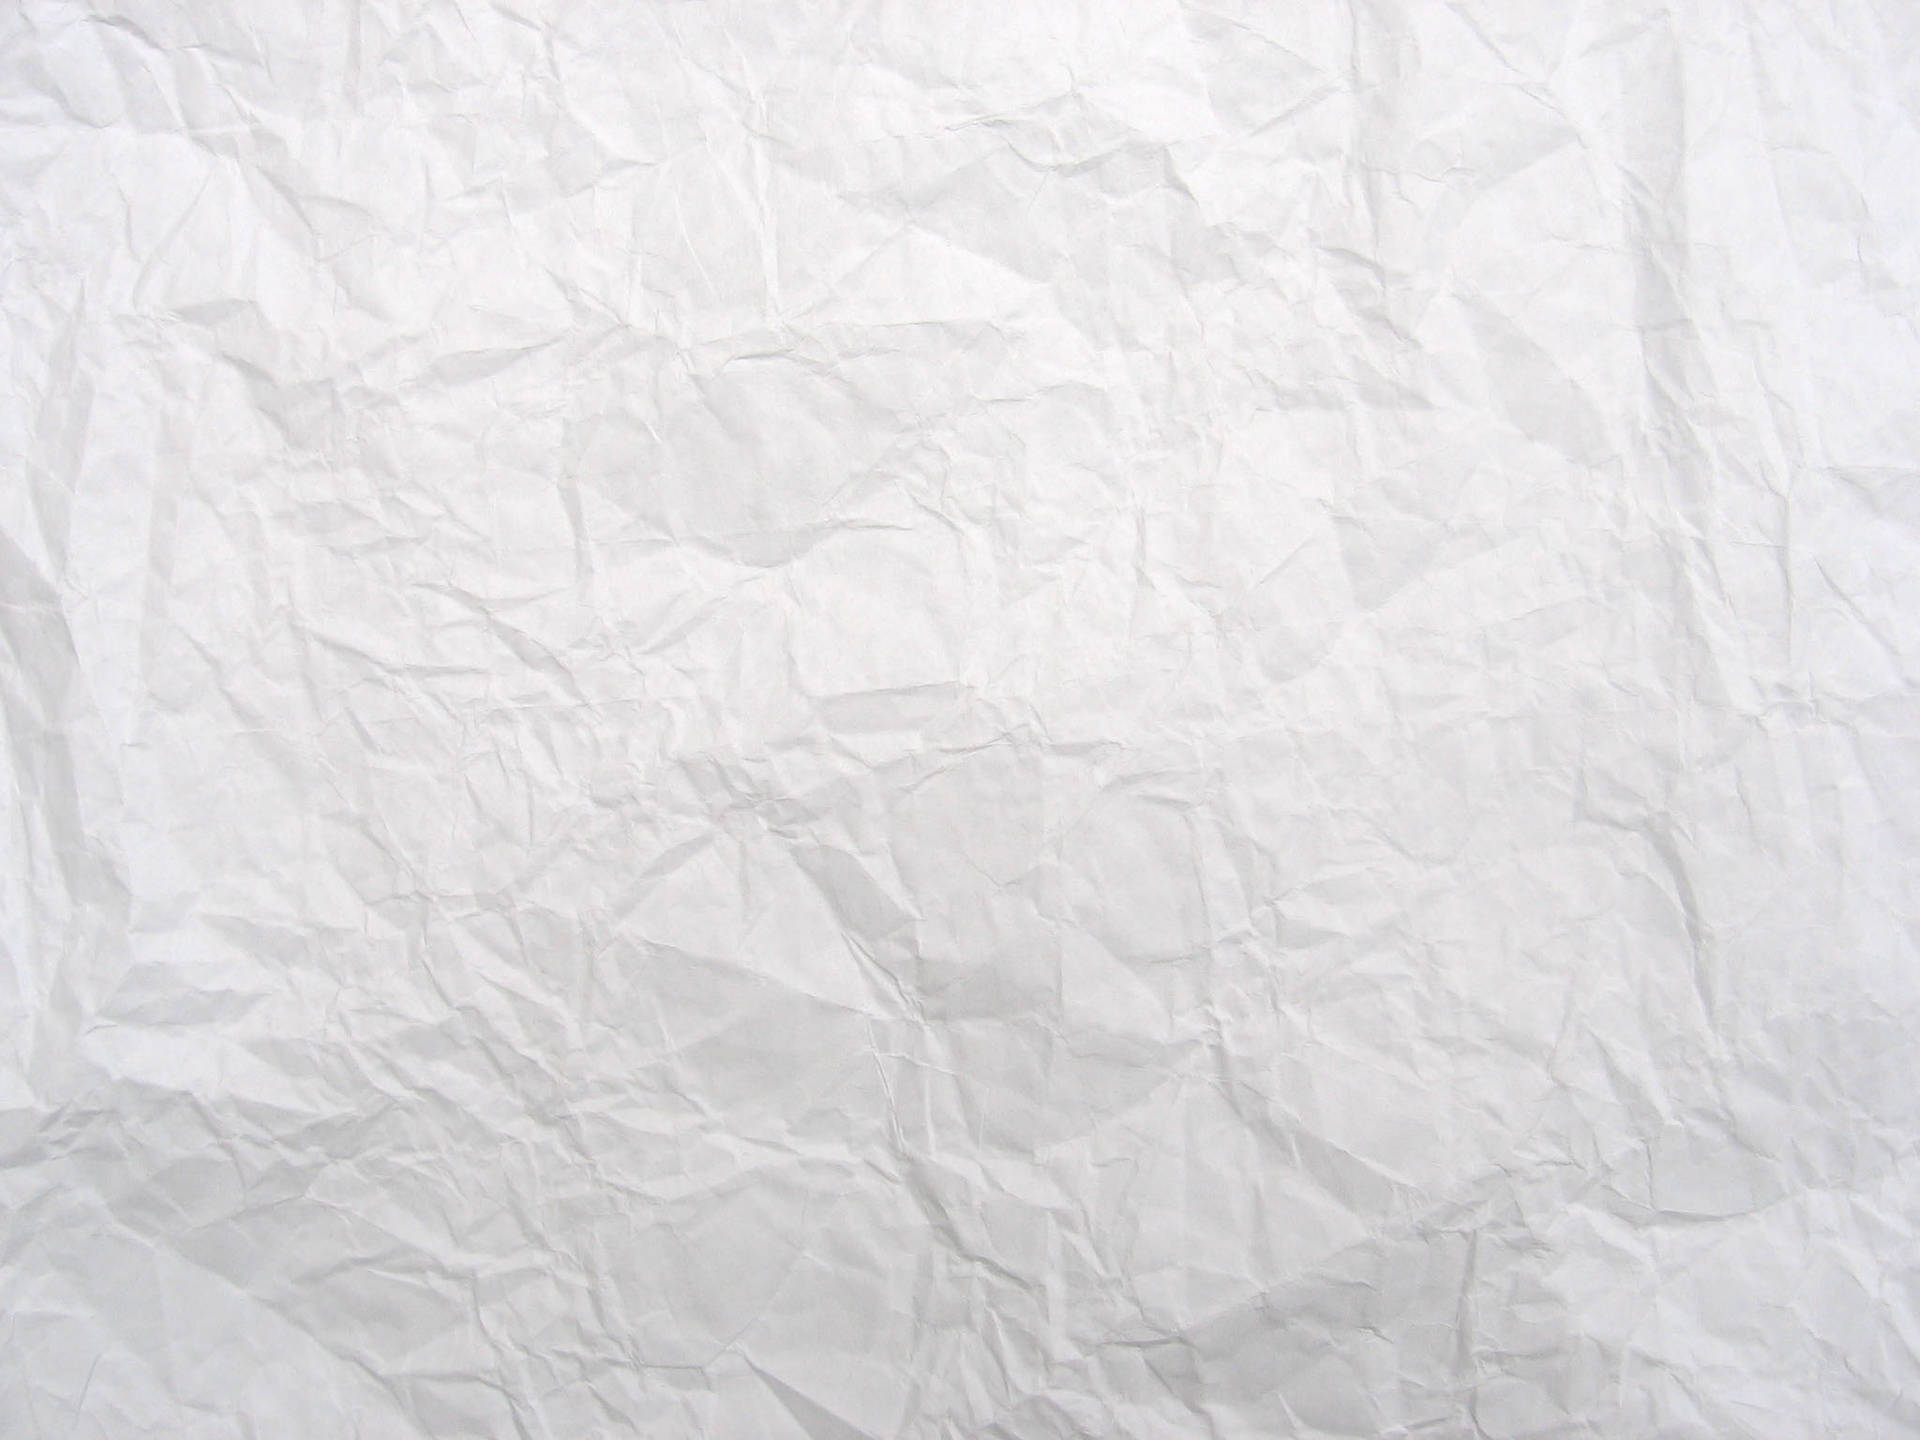 Abstract Texture of White Crumpled Paper Wallpaper